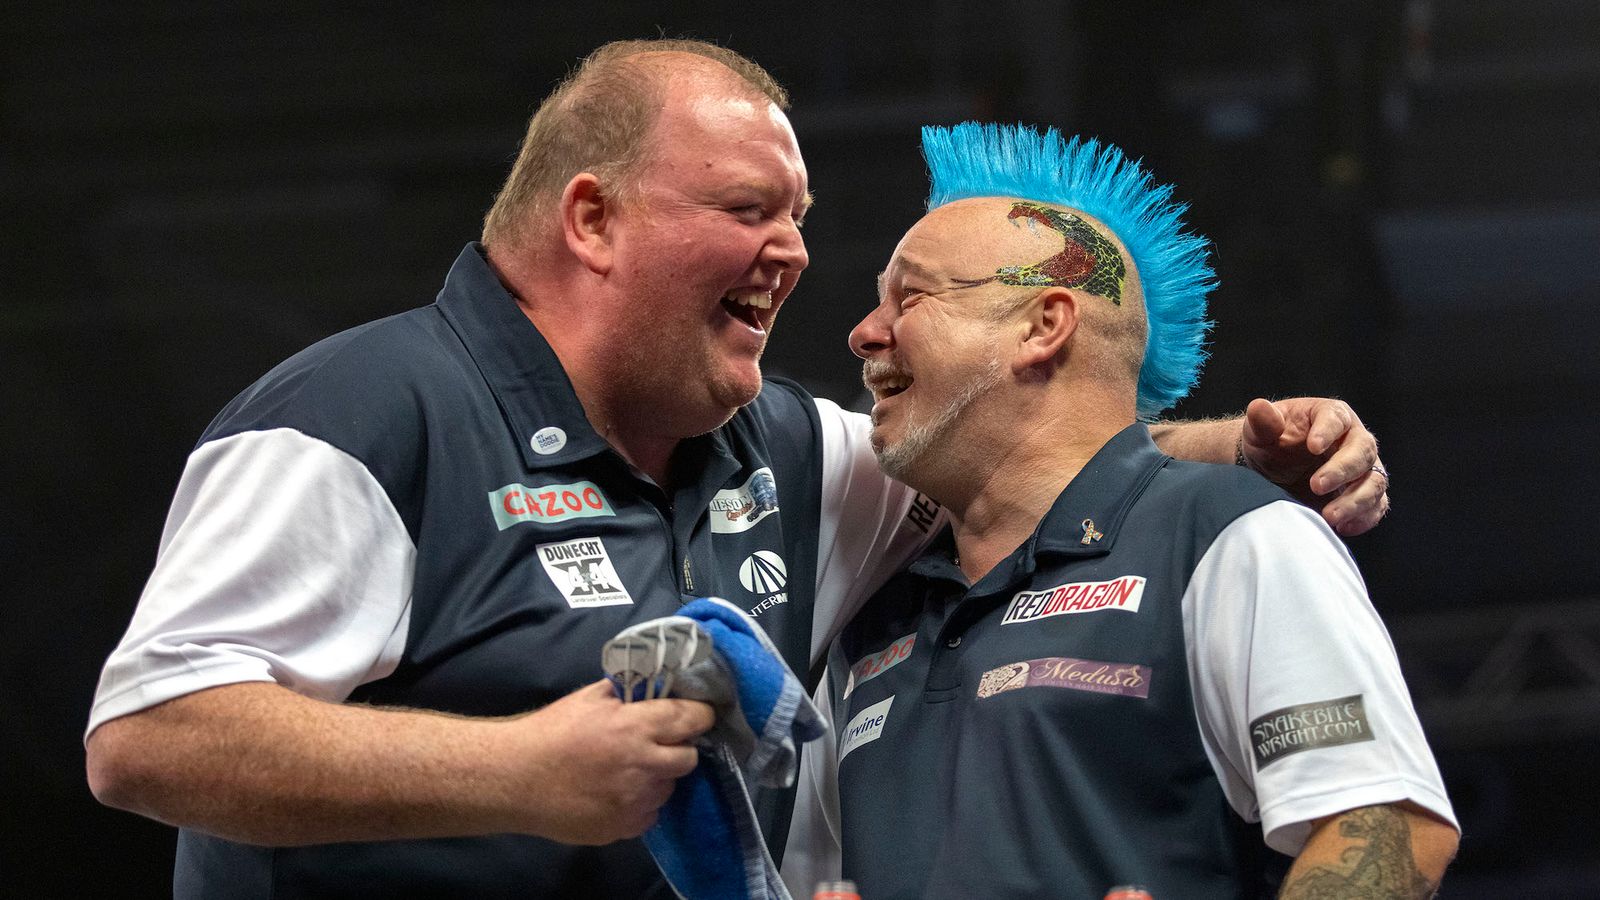 World Cup of Darts pairings confirmed with Peter Wright and John Henderson defending their 2021 title